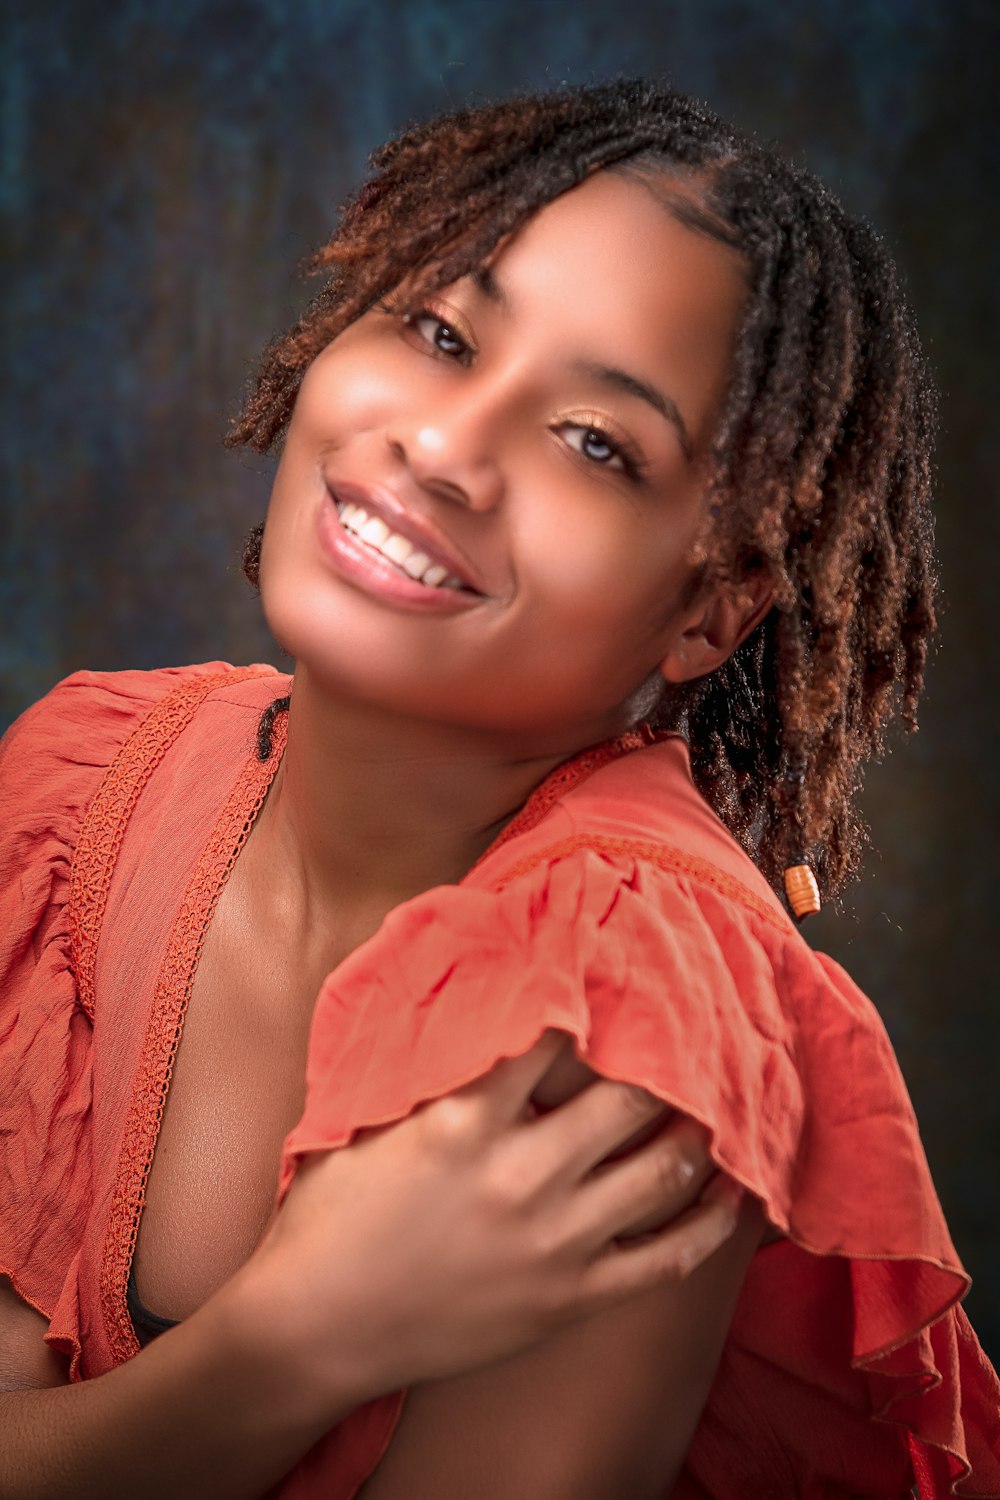 a woman with dreadlocks is smiling at the camera